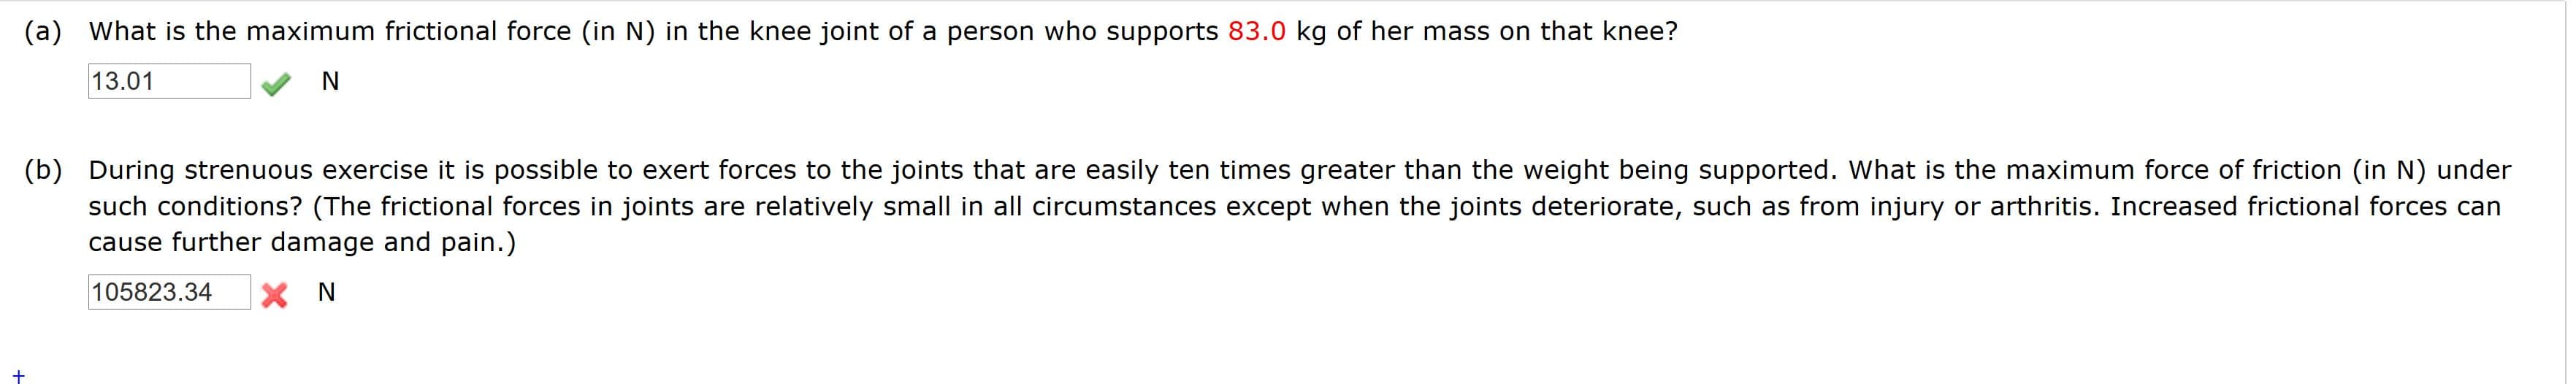 (a) What is the maximum frictional force (in N) in the knee joint of a person who supports 83.0 kg of her mass on that knee?
13.01
N
(b) During strenuous exercise it is possible to exert forces to the joints that are easily ten times greater than the weight being supported. What is the maximum force of friction (in N) under
such conditions? (The frictional forces in joints are relatively small in all circumstances except when the joints deteriorate, such as from injury or arthritis. Increased frictional forces can
cause further damage and pain.)
105823.34
X N
